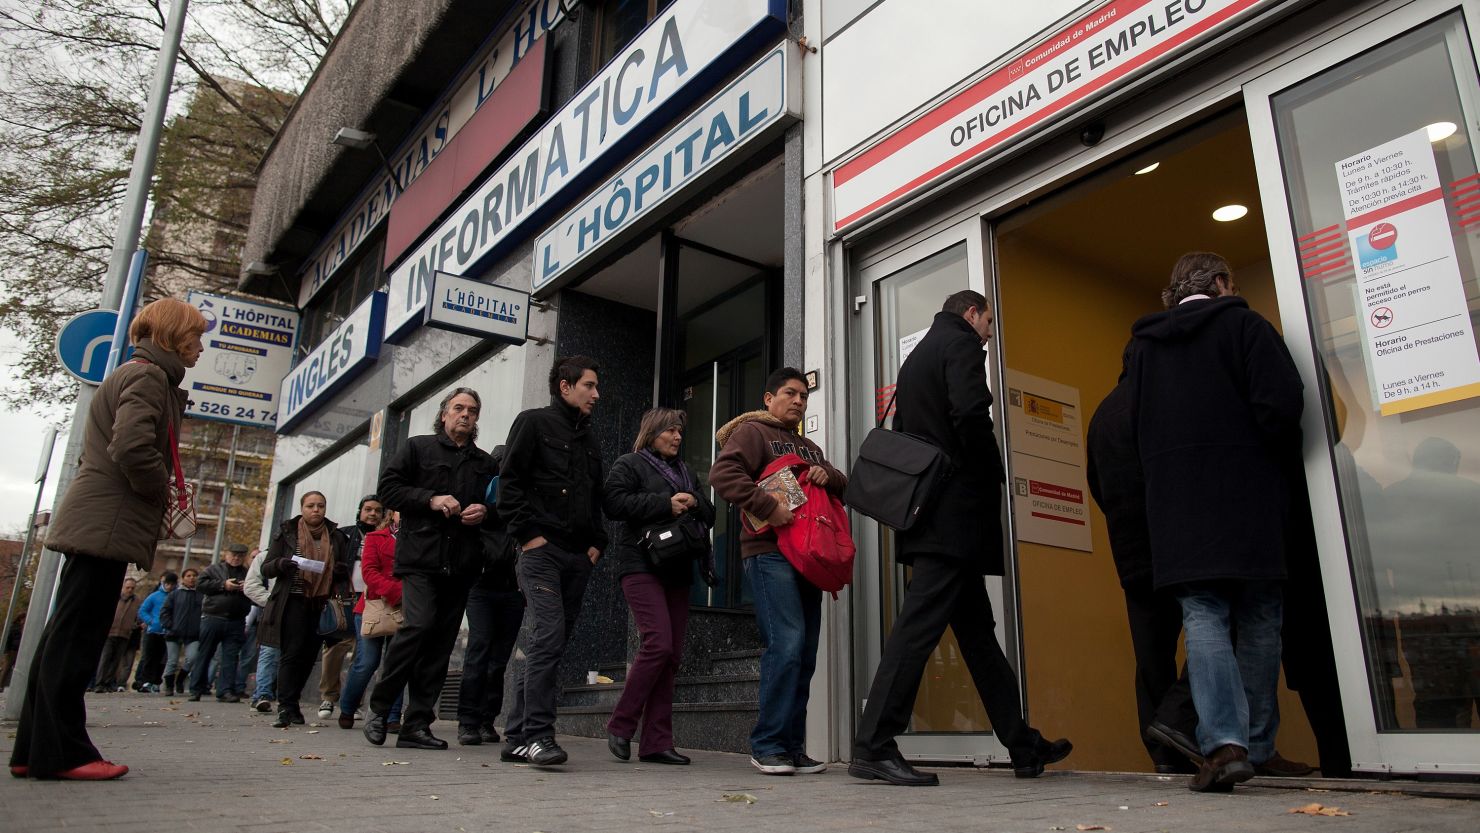 European countries like Spain struggle with unemployment. 